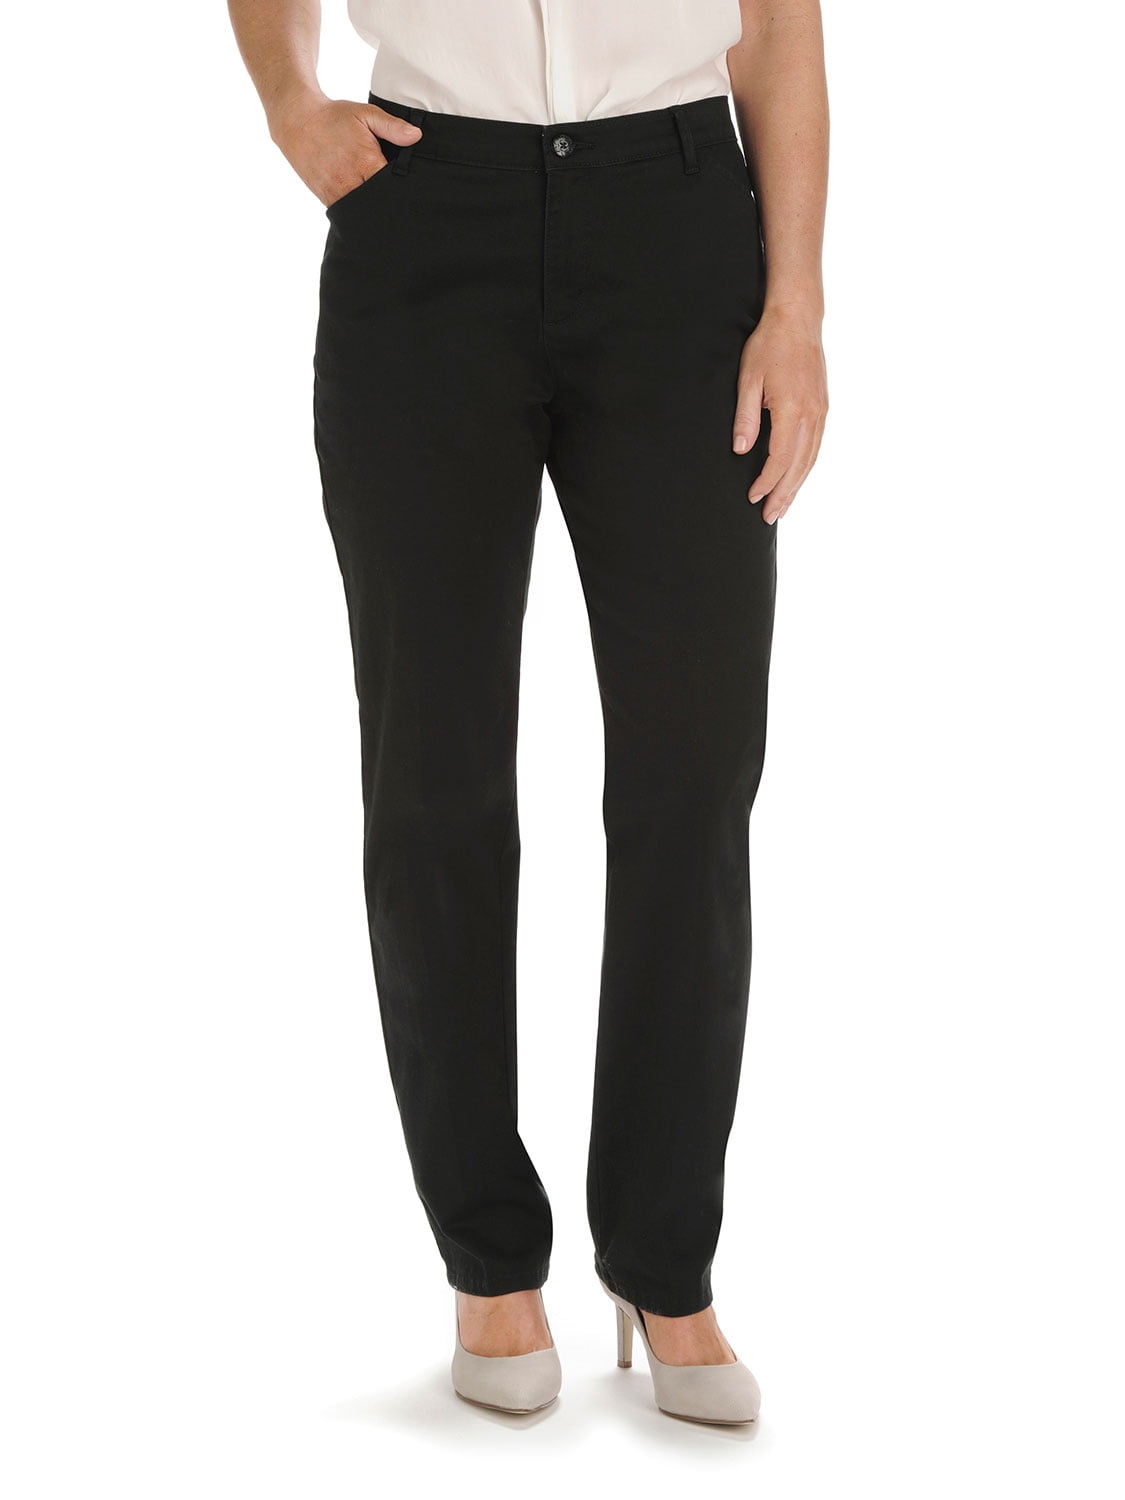 Lee Women's Relaxed Fit All Day Straight Leg Pants - Black, Black, 8